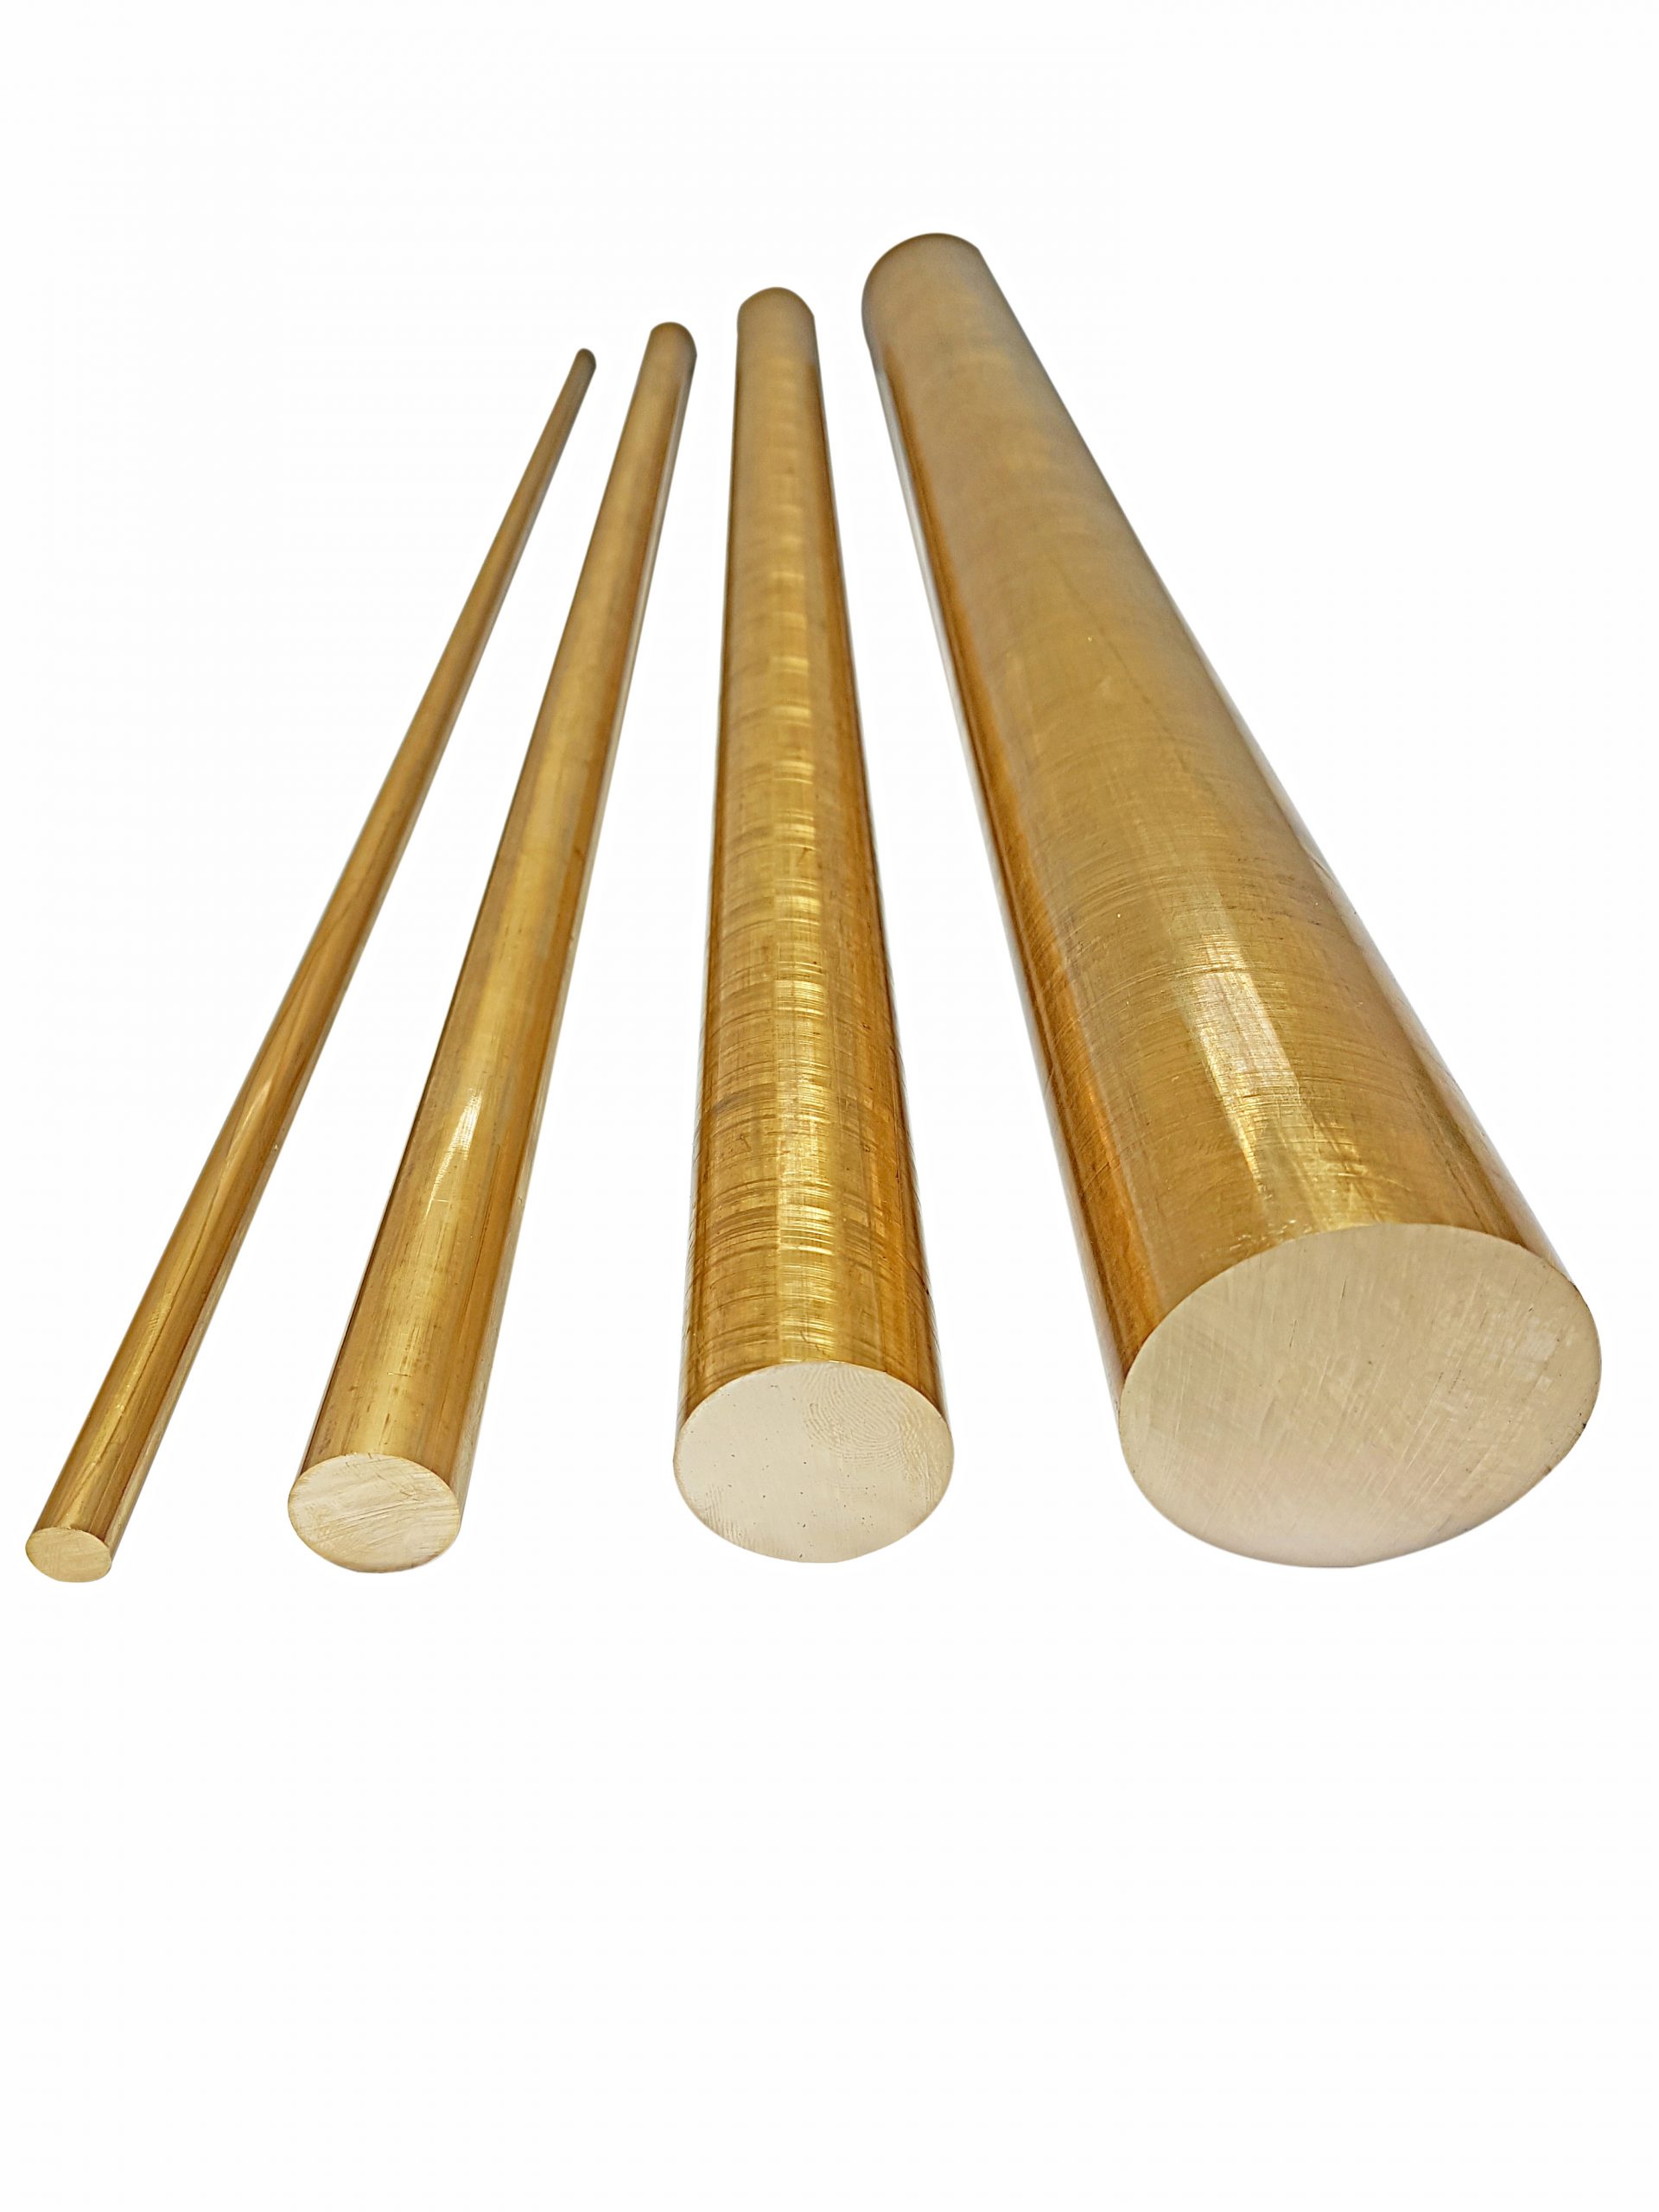 L Modelmaking Brass Round Bar Rod for Turning & Milling from UK 10mm x 100mm 